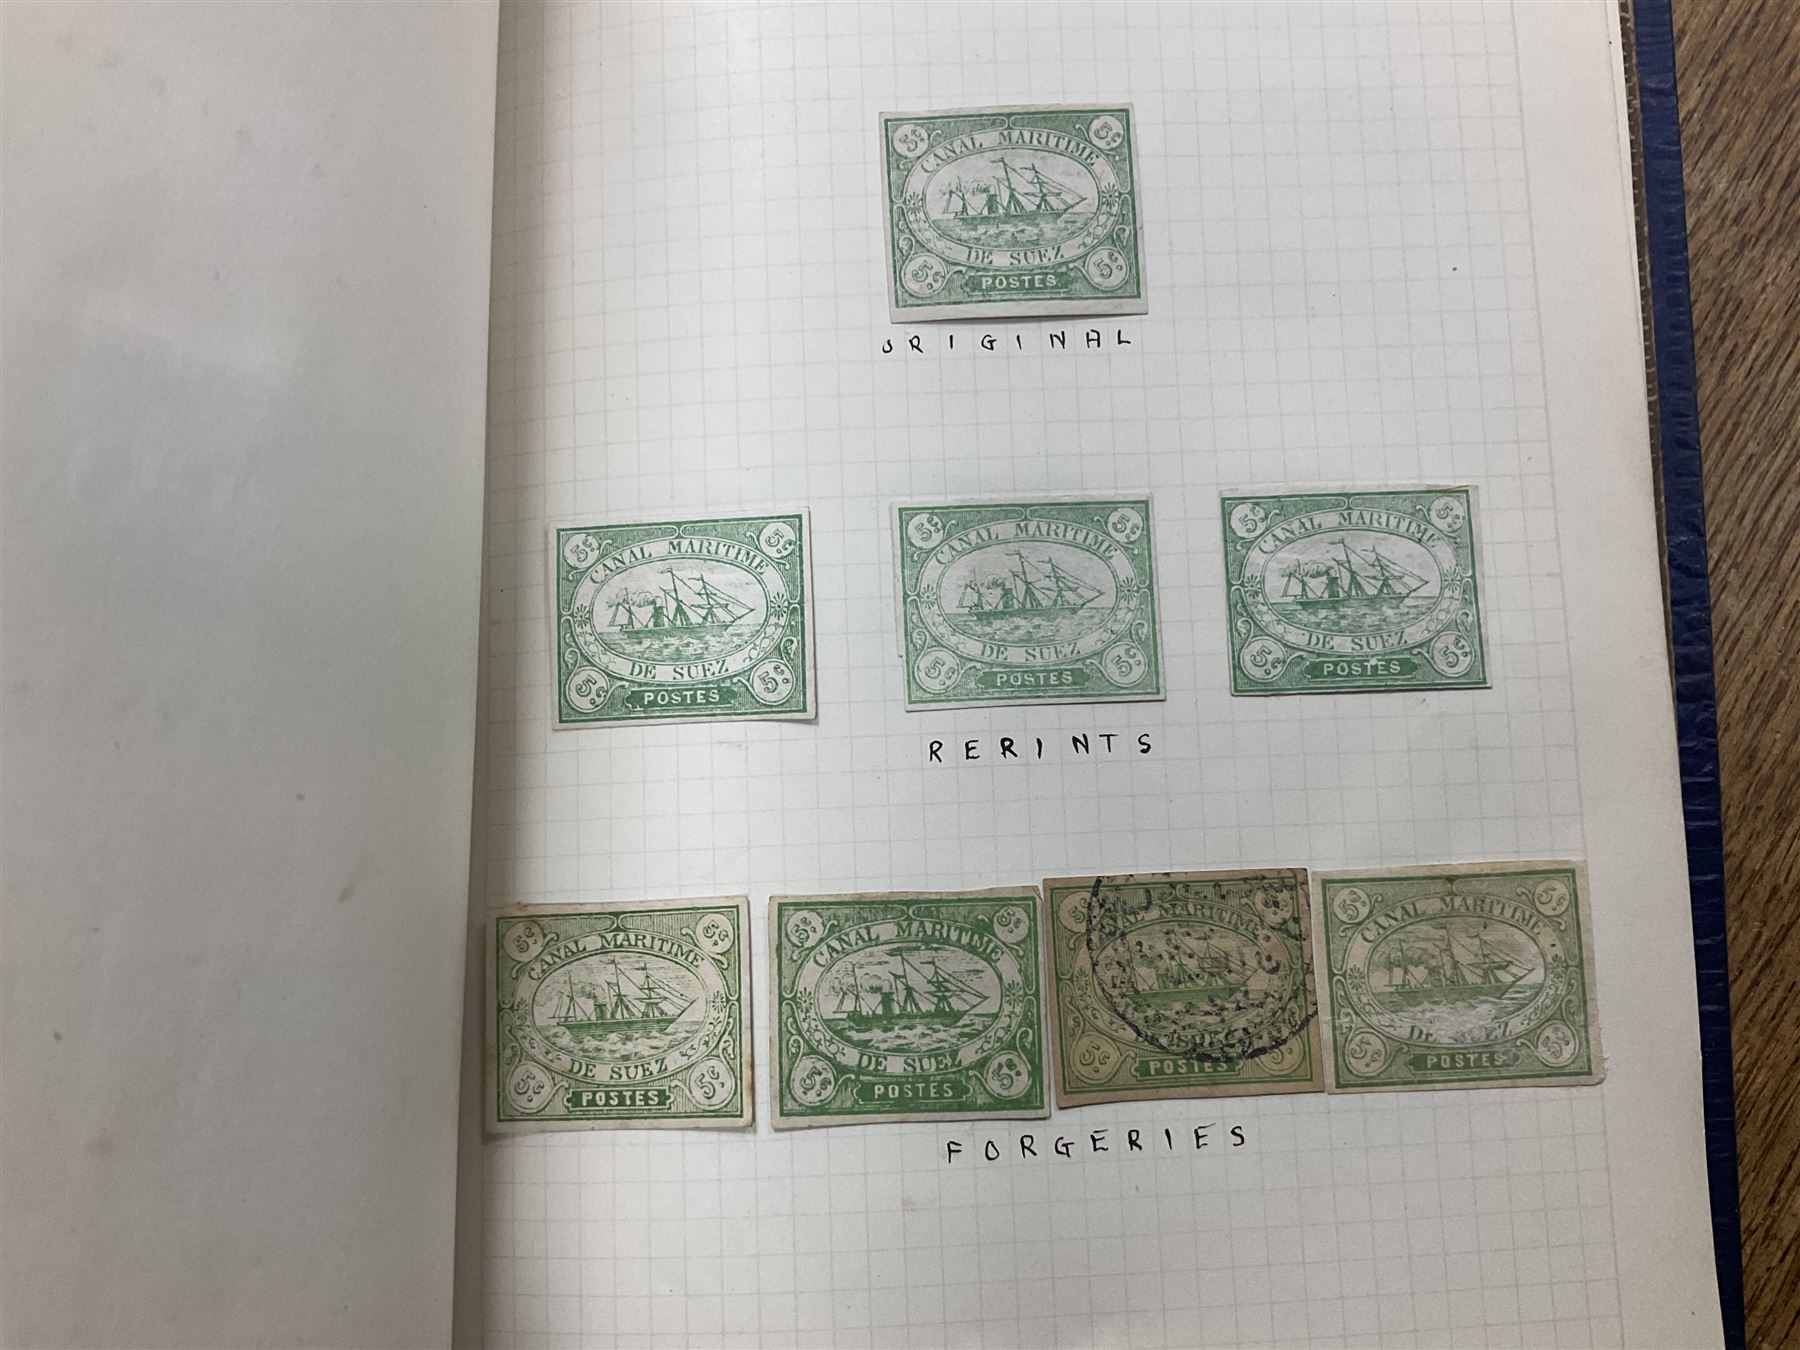 Egypt 1866 and later stamps - Image 294 of 761